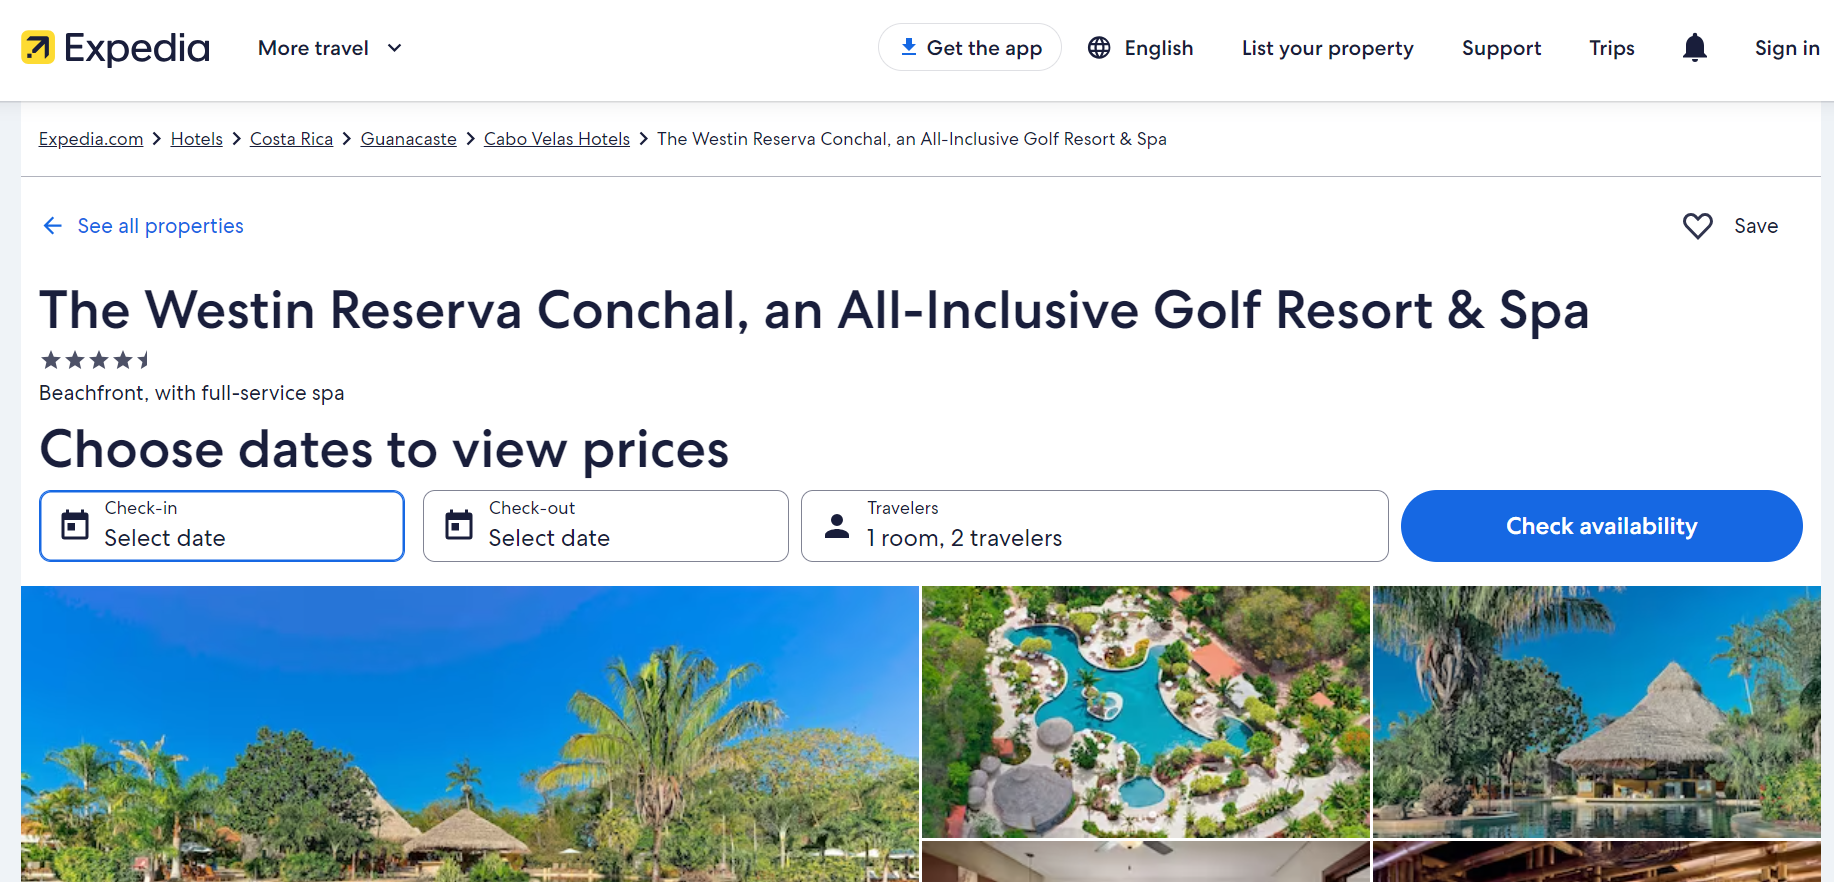 The Westin Reserva Conchal, an All-Inclusive Golf Resort & Spa 4.5 star property